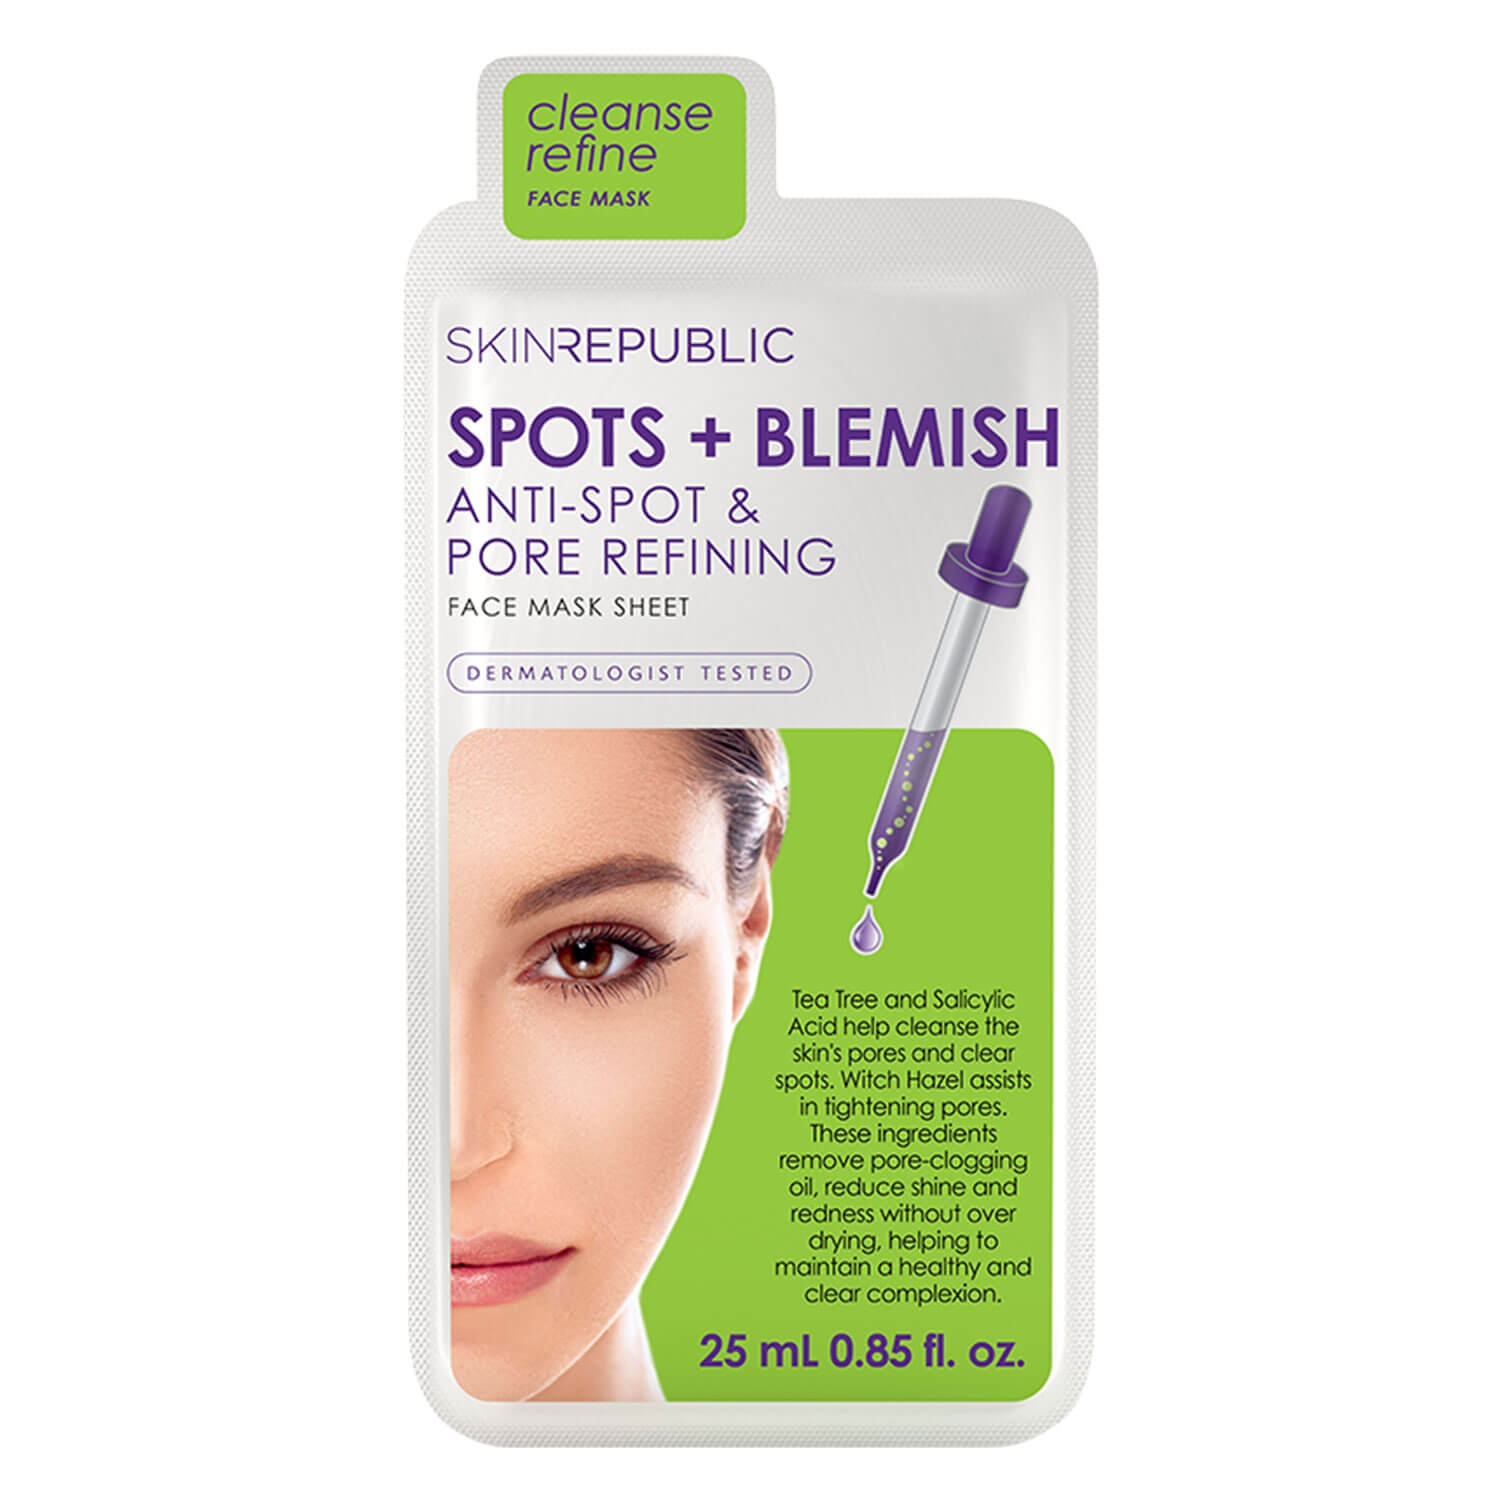 Product image from Skin Republic - Spots + Blemish Face Mask